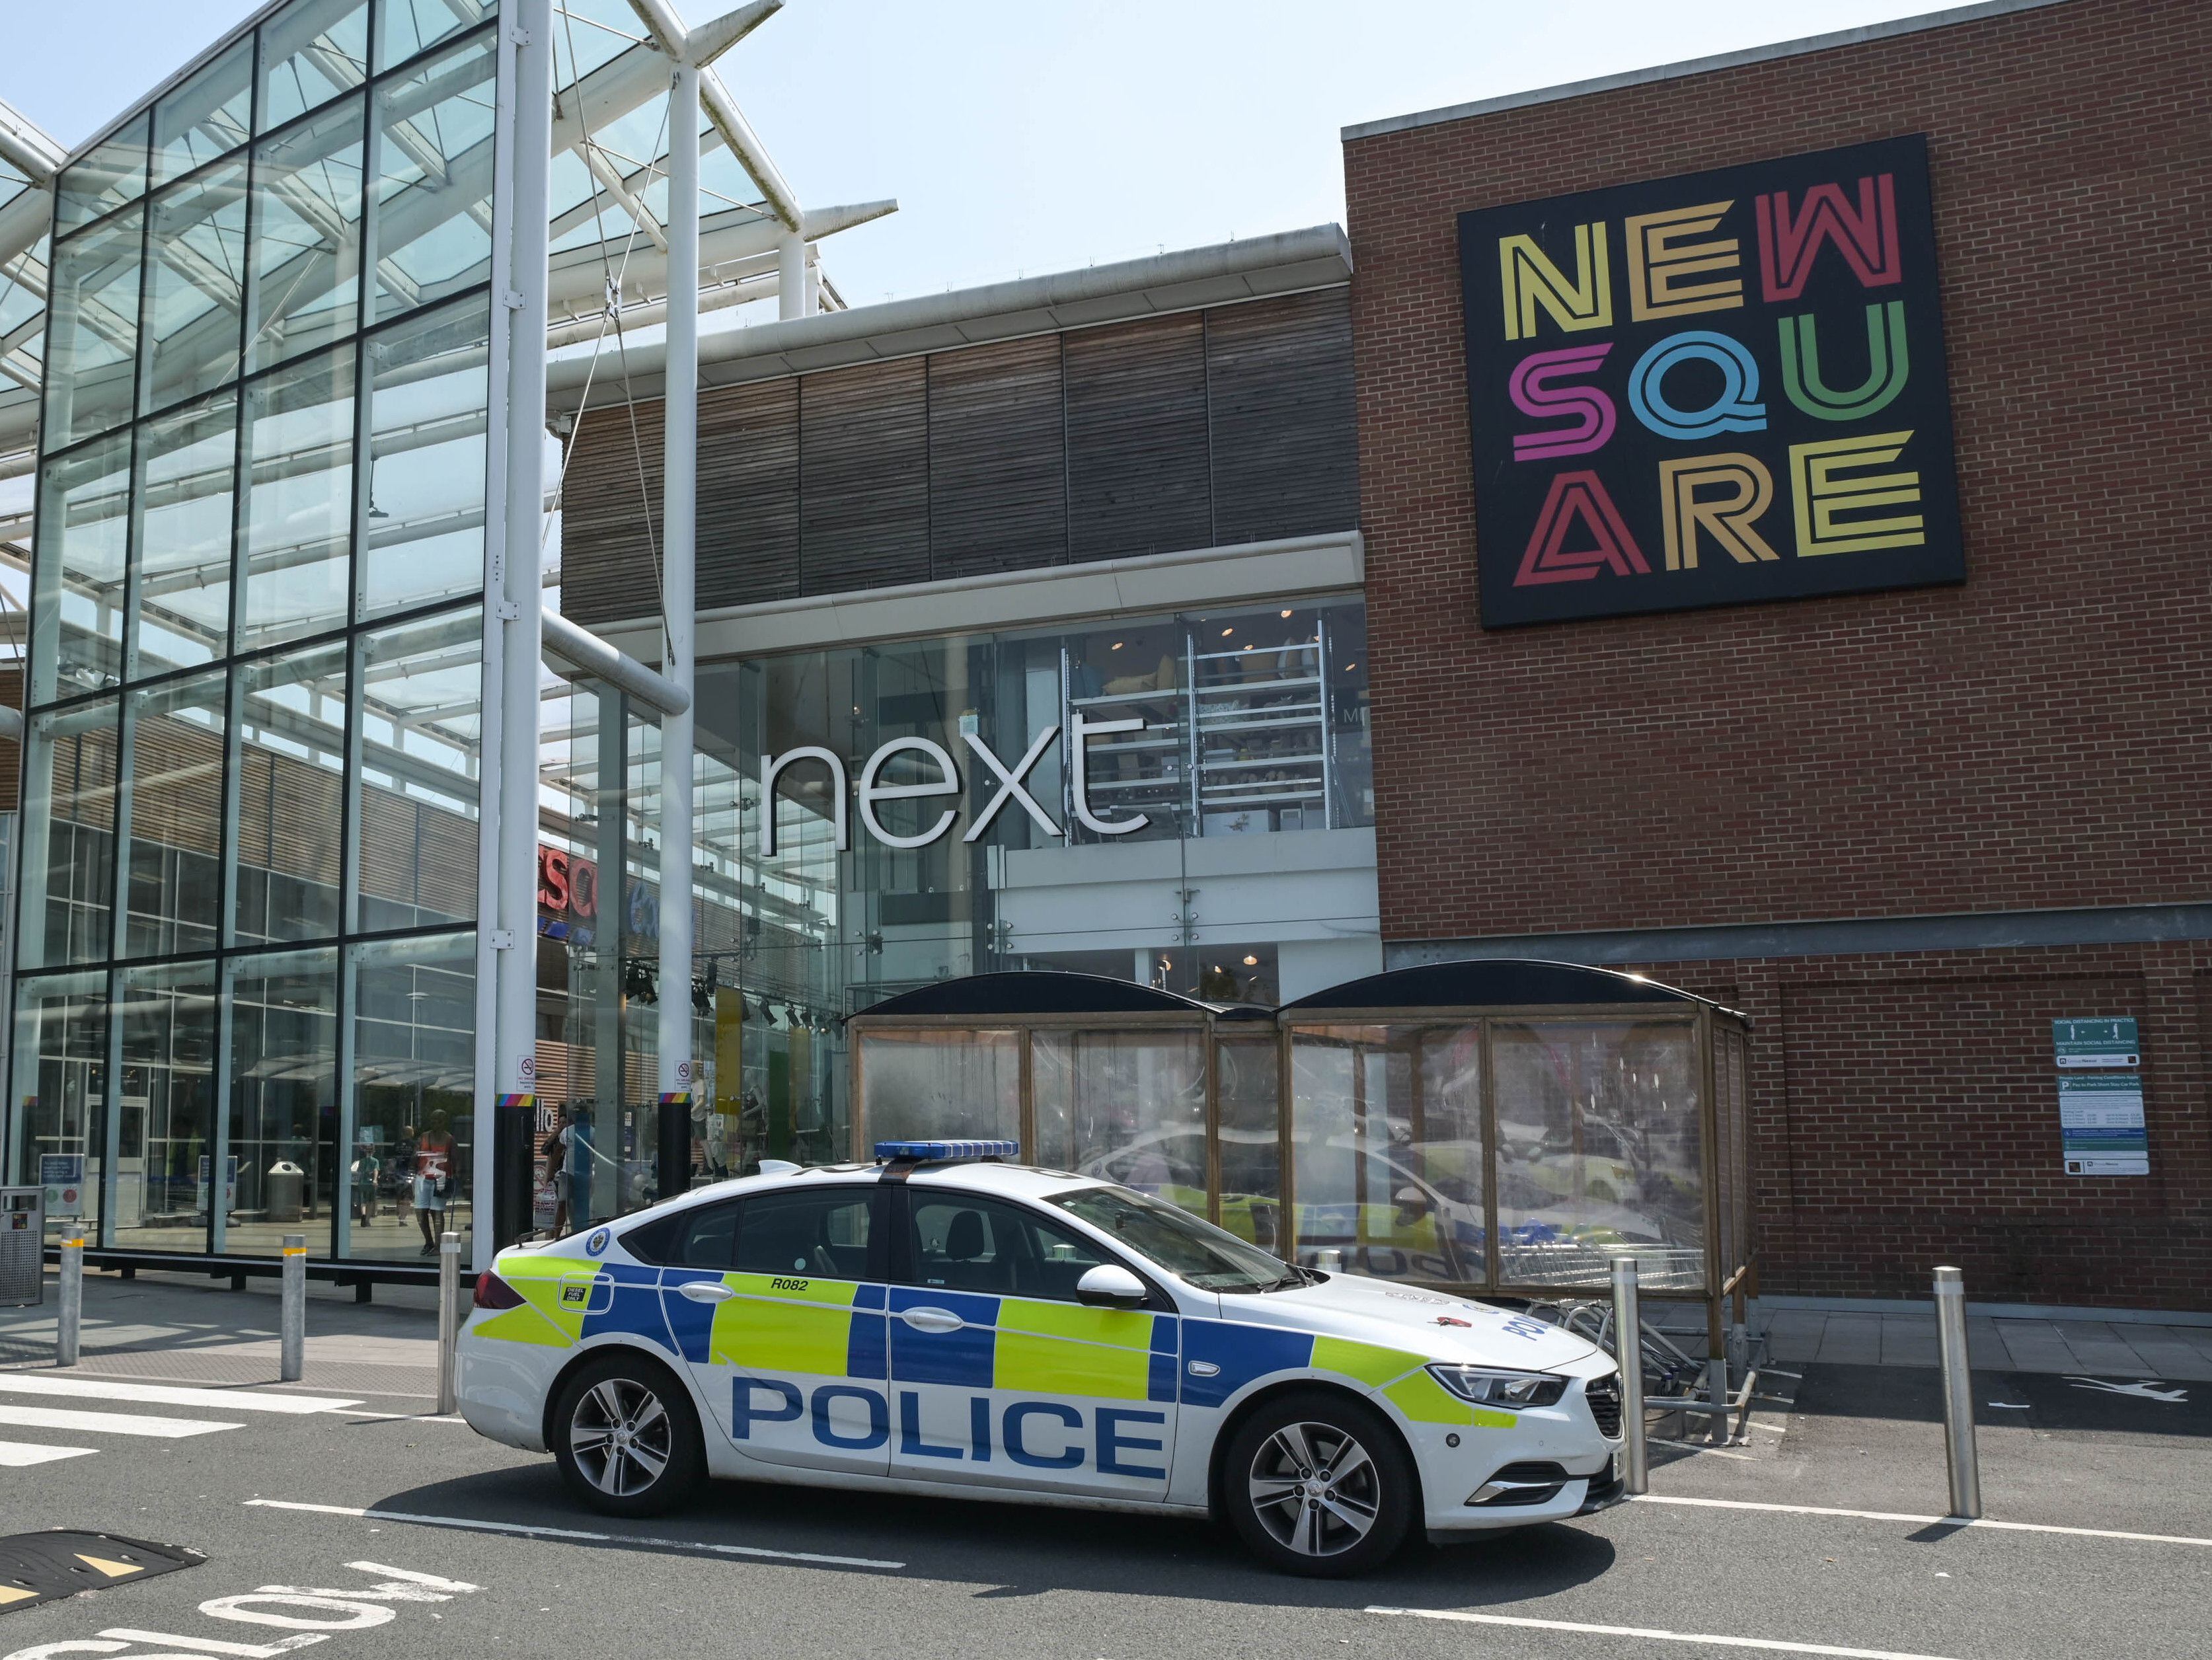 Brothers 'tried to murder police officers during knife crime operation at shopping centre'